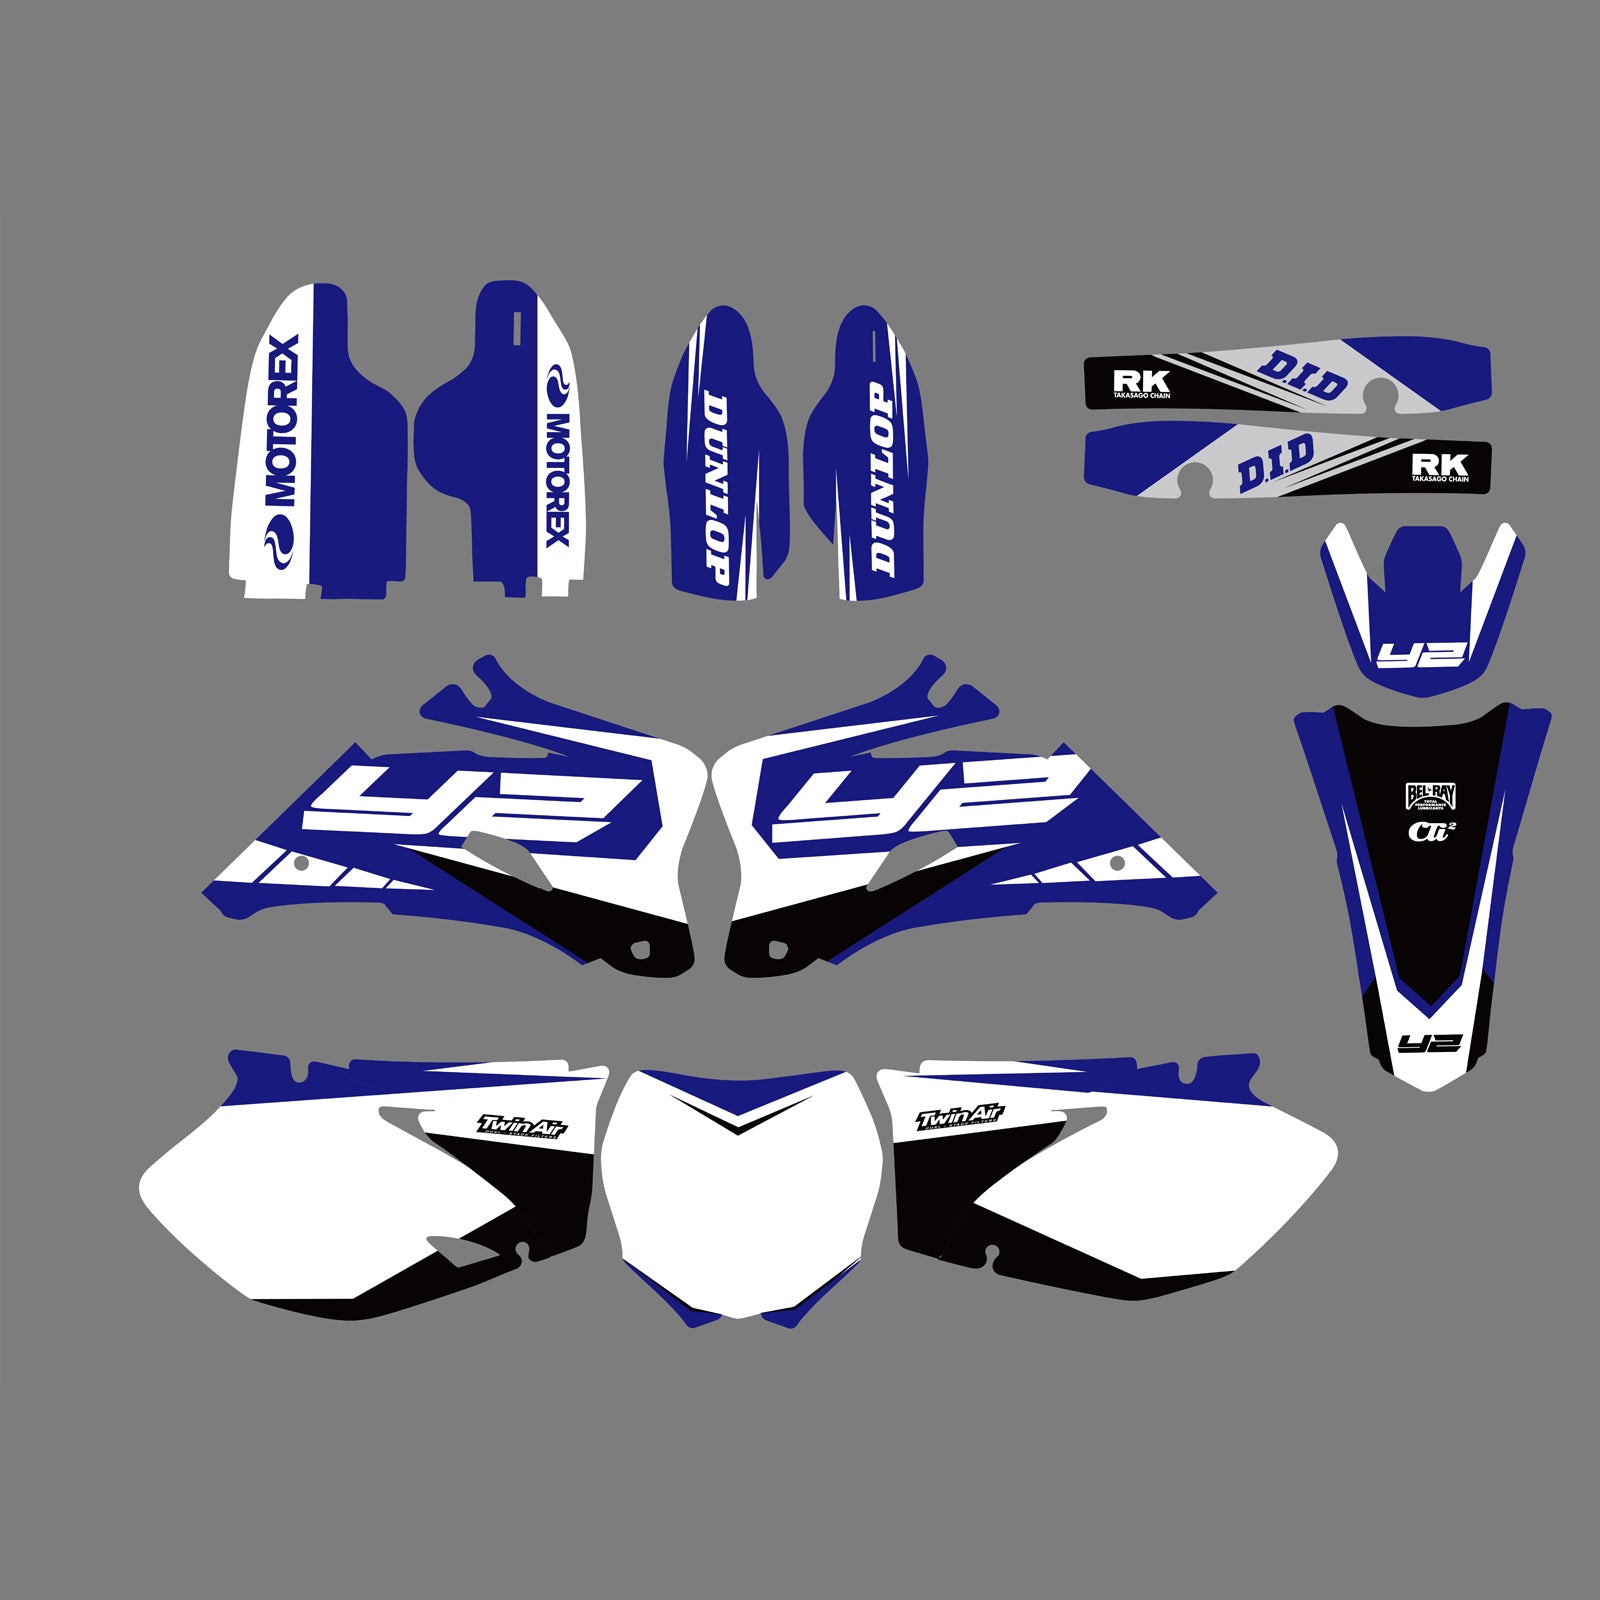 Team Graphics & Backgrounds Decals Stickers Kit for YAMAHA YZF250/YZF450 2006-2009